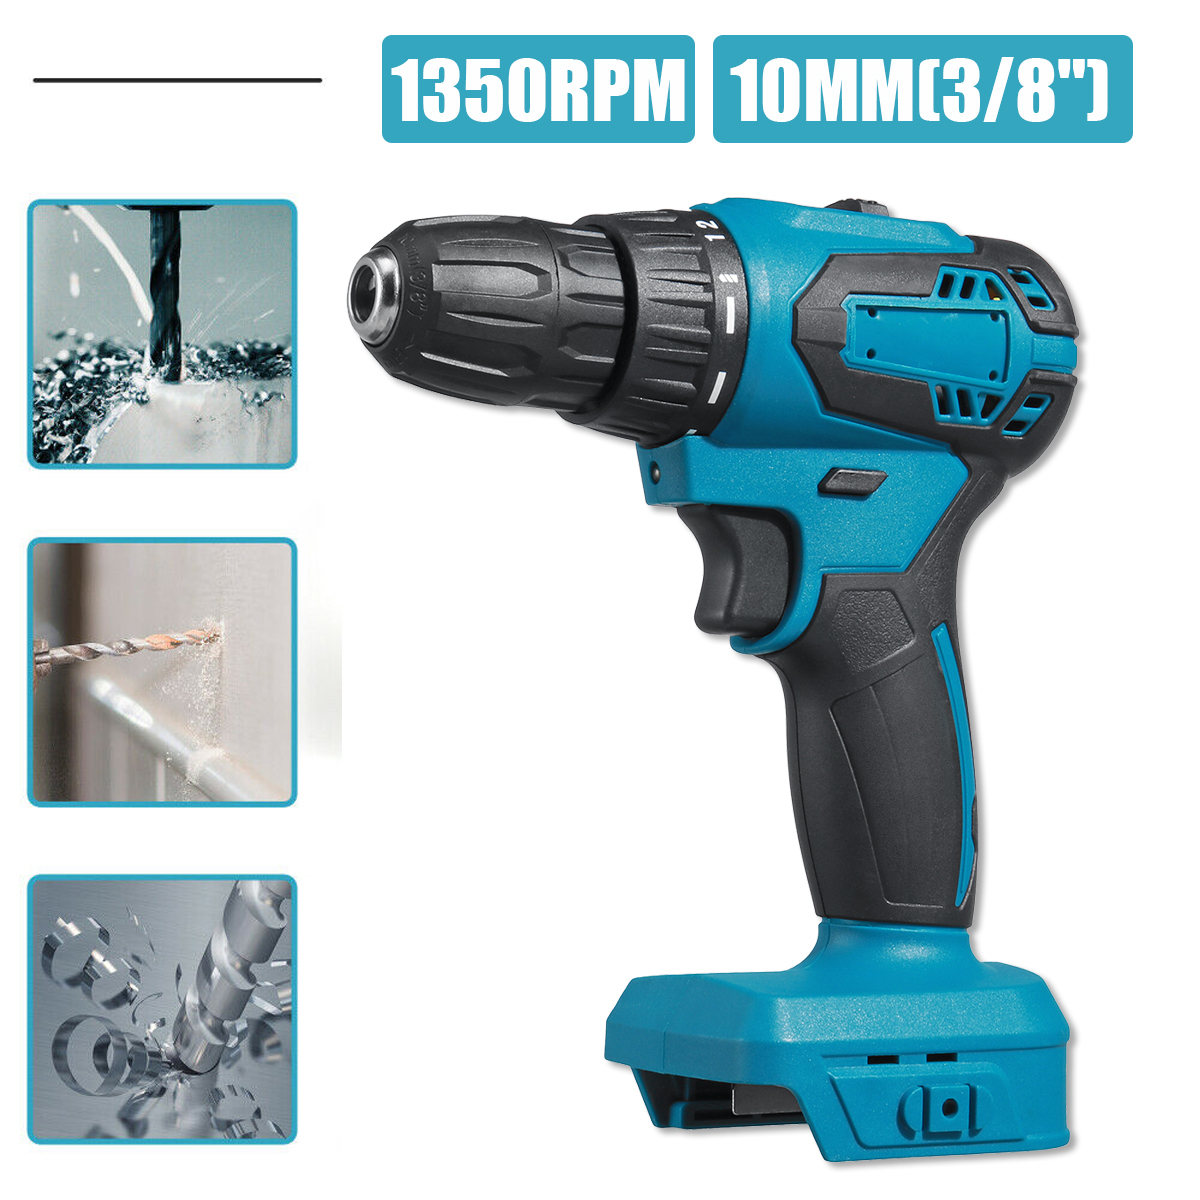 10mm-Rechargable-Electric-Drill-Screwdriver-1350RPM-2-Speed-Impact-Hand-Drill-Fit-Makita-Battery-1882944-10